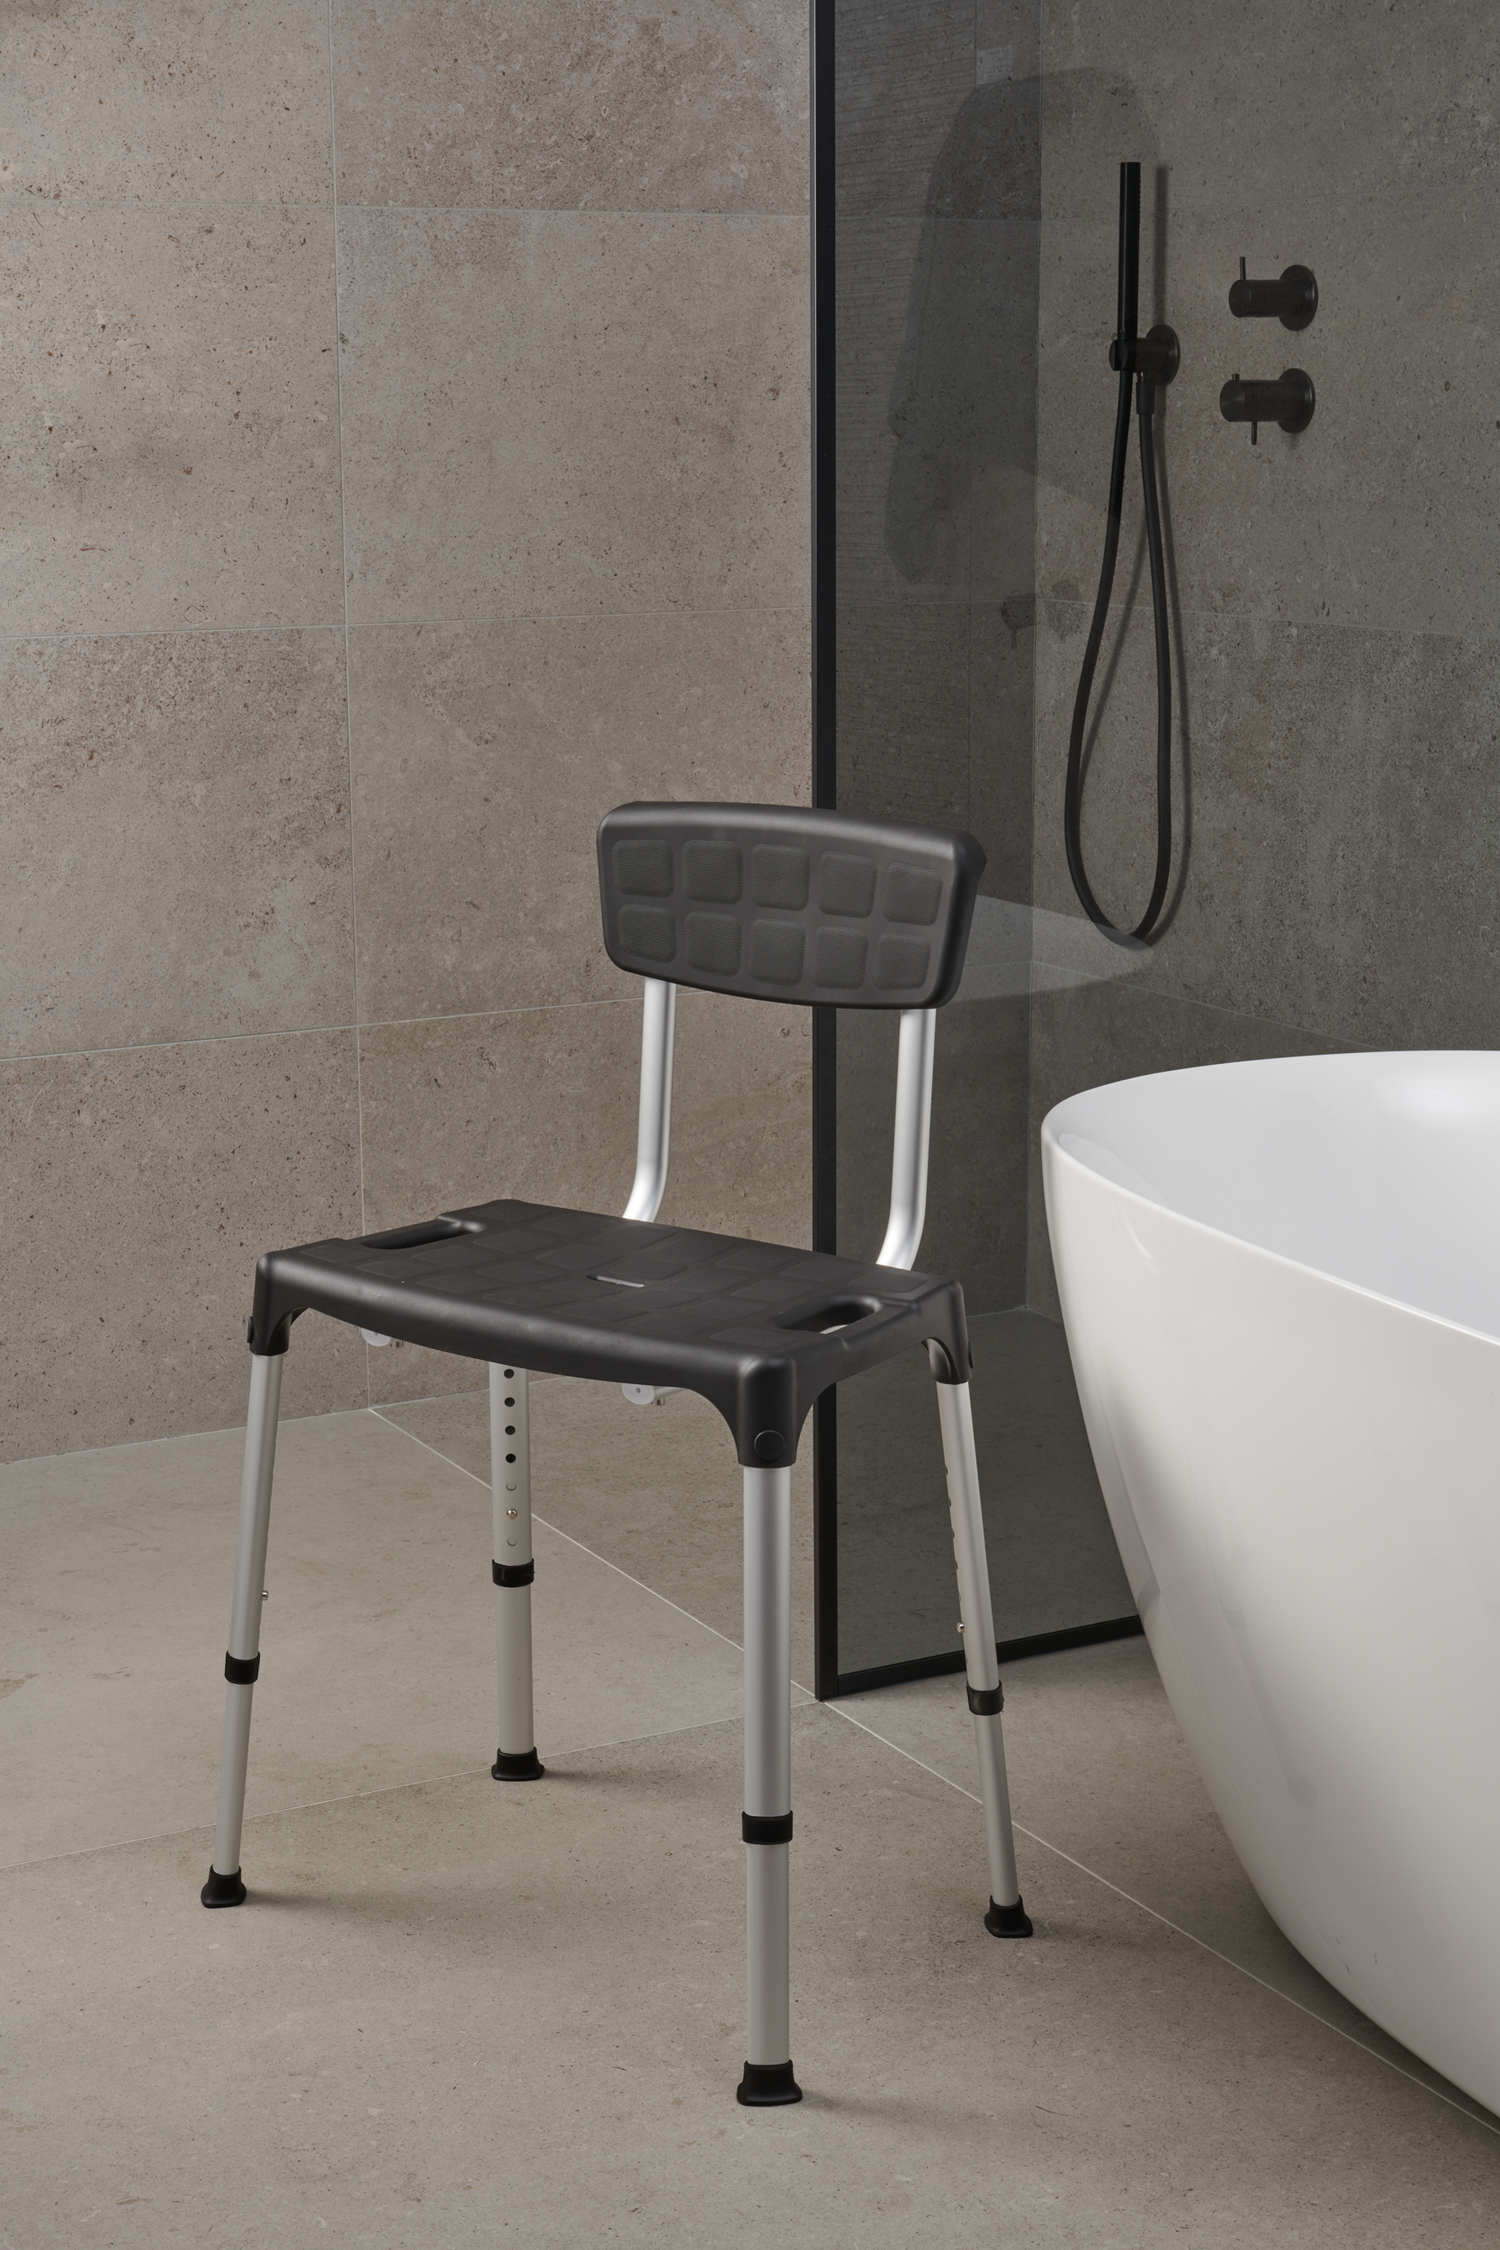 SecuCare Quattro Shower Chair with backrest, black, adjustable height 390-540 mm